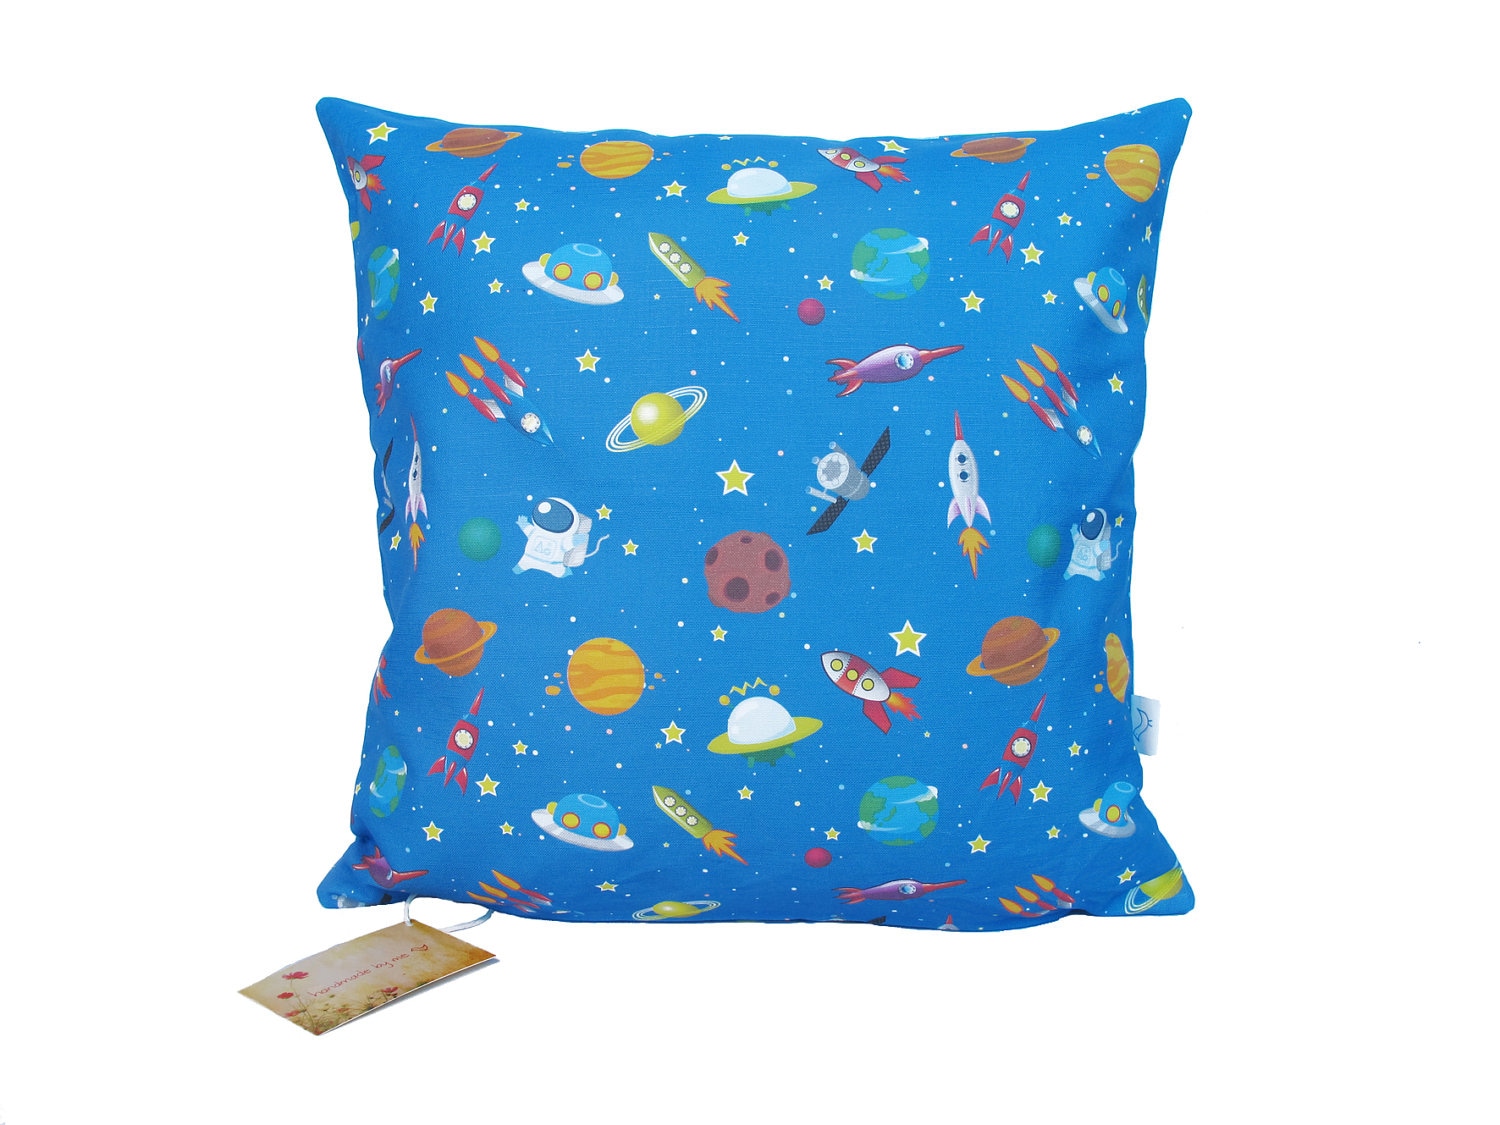 space rocket solar system cushion cover by handmadebymeshop